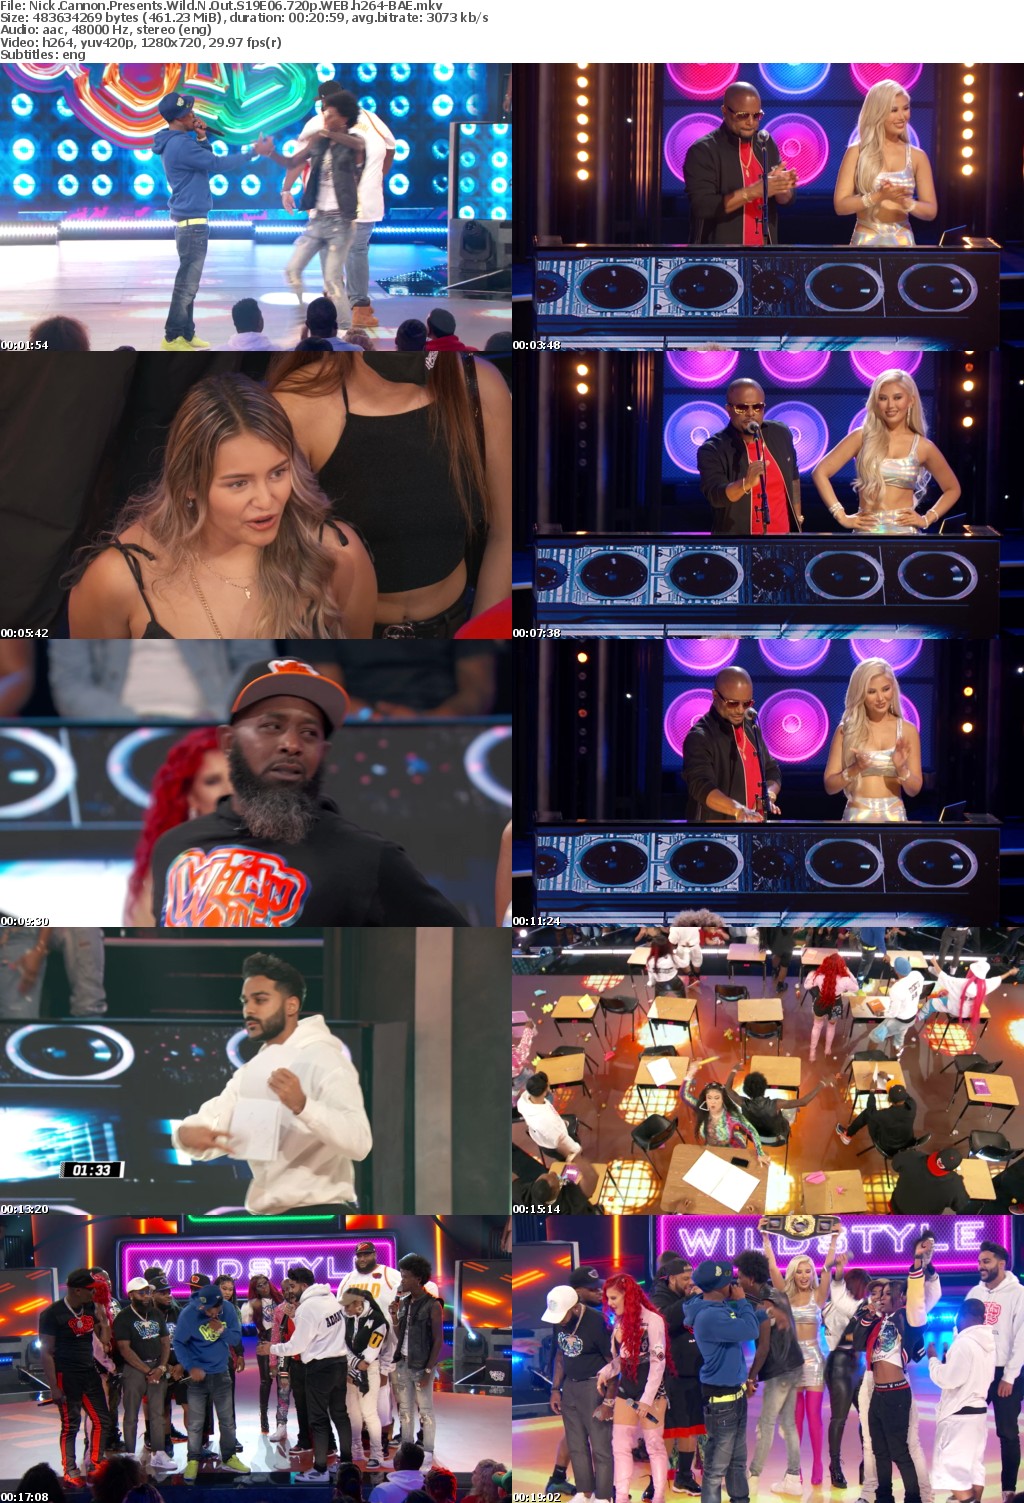 Nick Cannon Presents Wild N Out S19E06 720p WEB h264-BAE